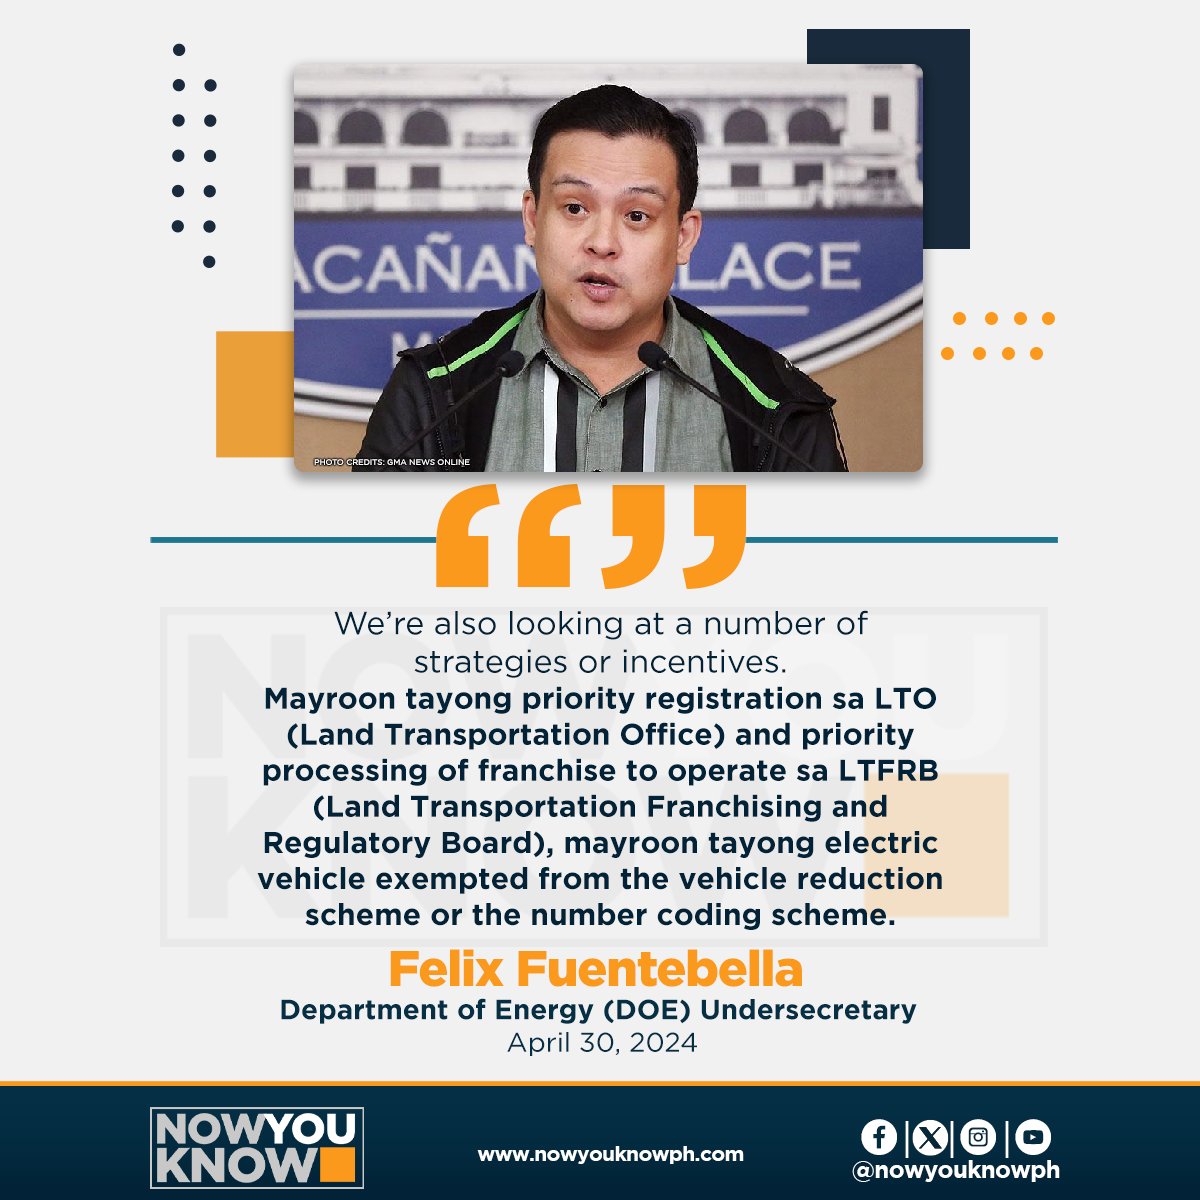 Exemptions from traffic schemes, special lanes and prioritization in transport offices are among the incentives being eyed by the government to encourage more people to shift to electric vehicles (EVs). READ: tinyurl.com/54jtnkmw 📰Inquirer.net